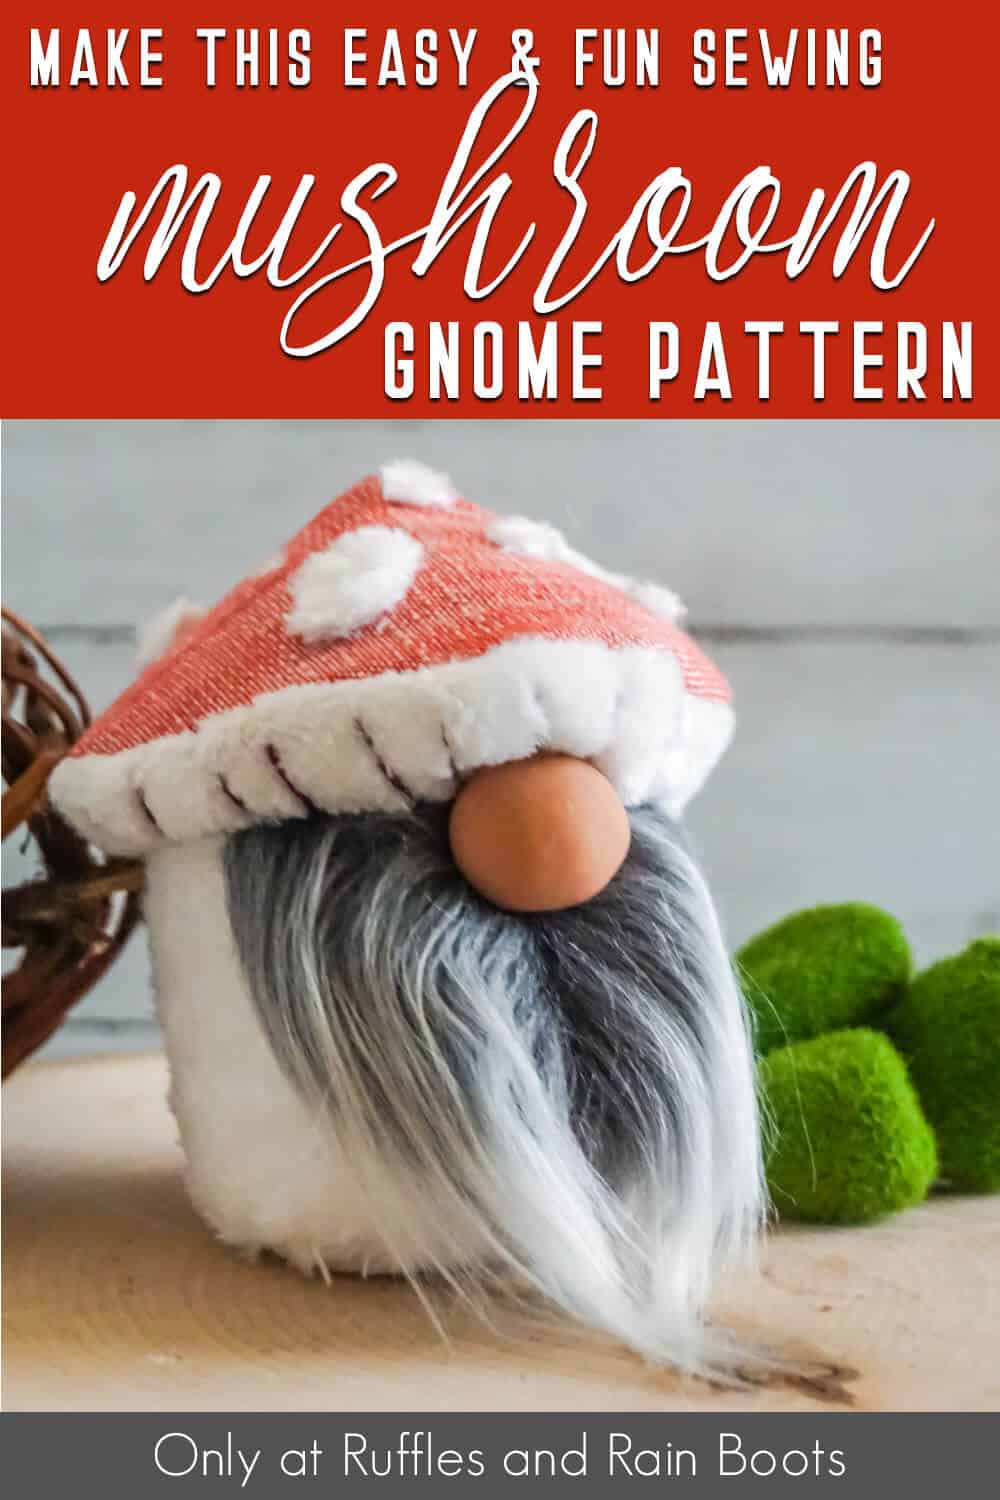 diy mushroom gnome sewing pattern with text which reads make this easy & fun sewing mushroom gnome pattern